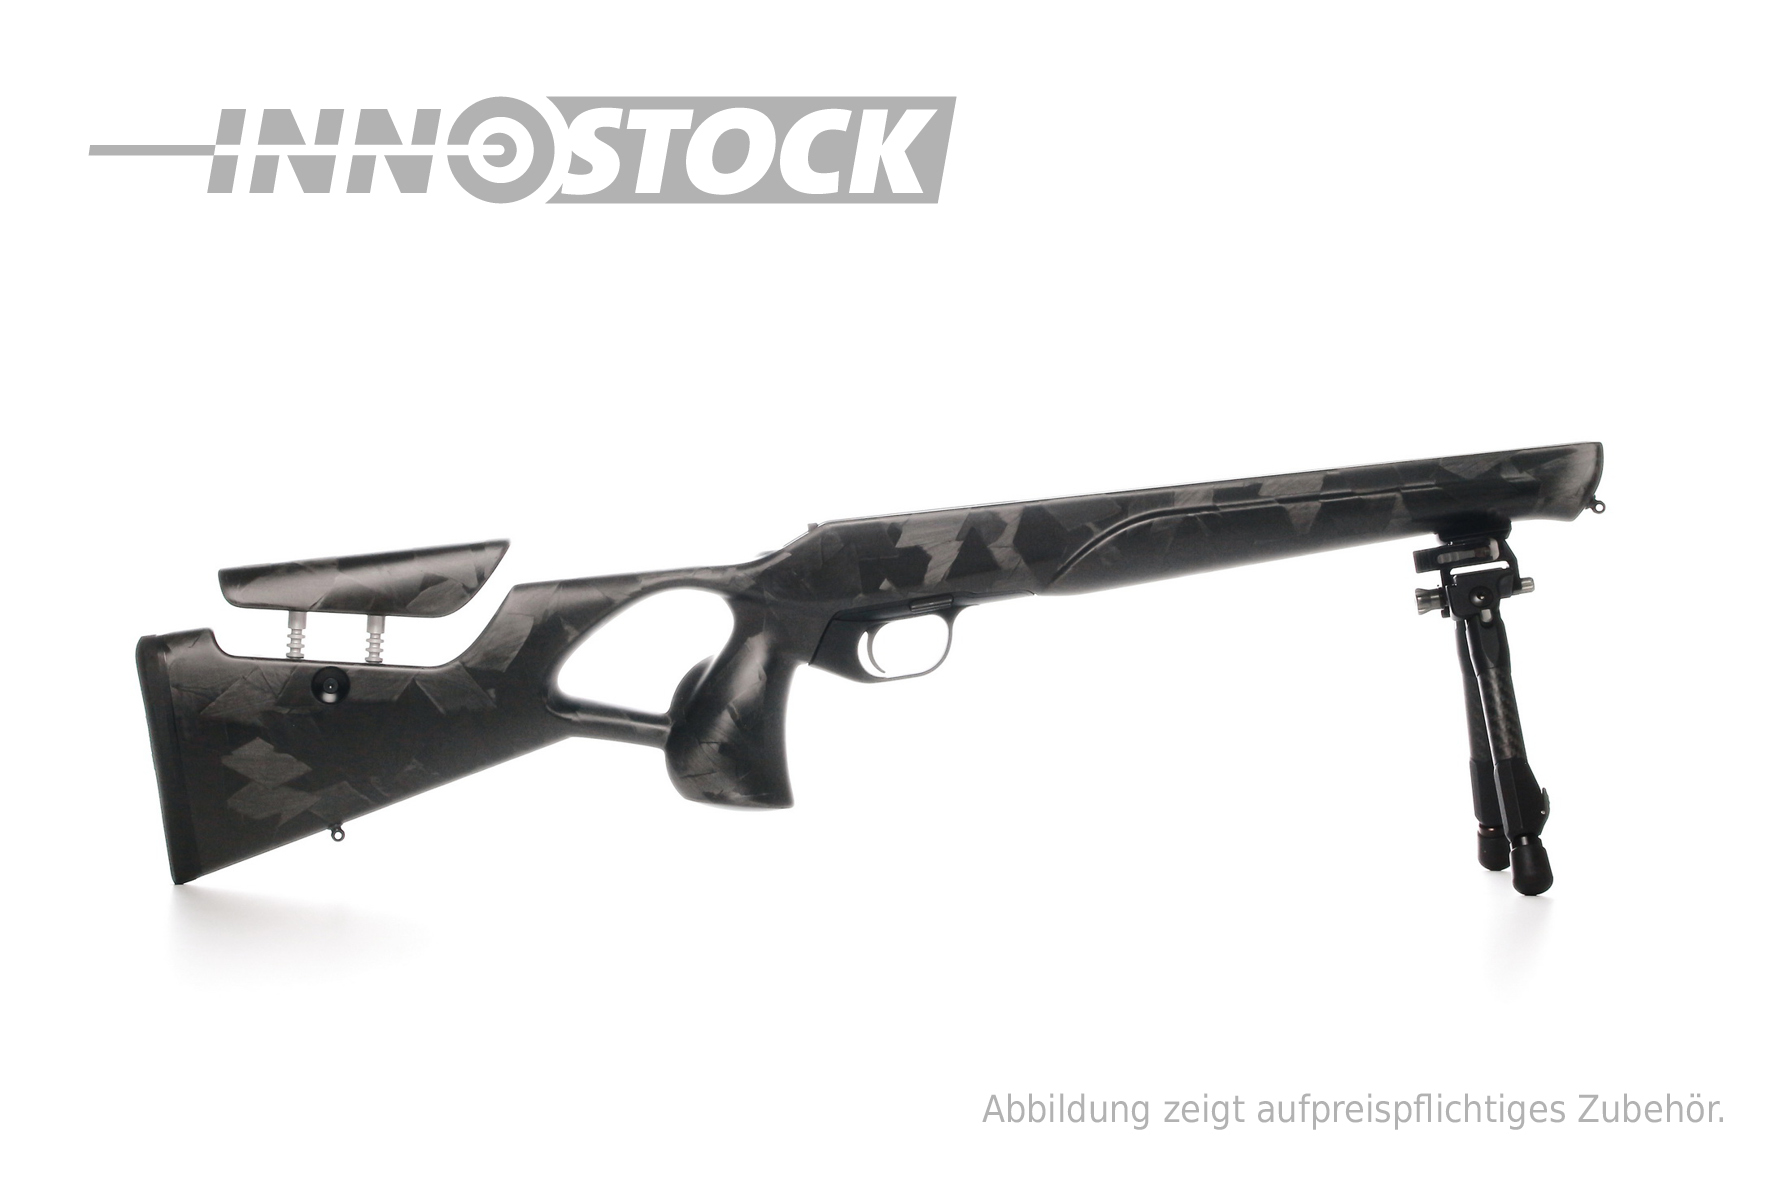 Carbon Stock - M932 - for System Blaser R93 - Standard (17MM) - Carbon Camo - inkl. Spartan Adapter